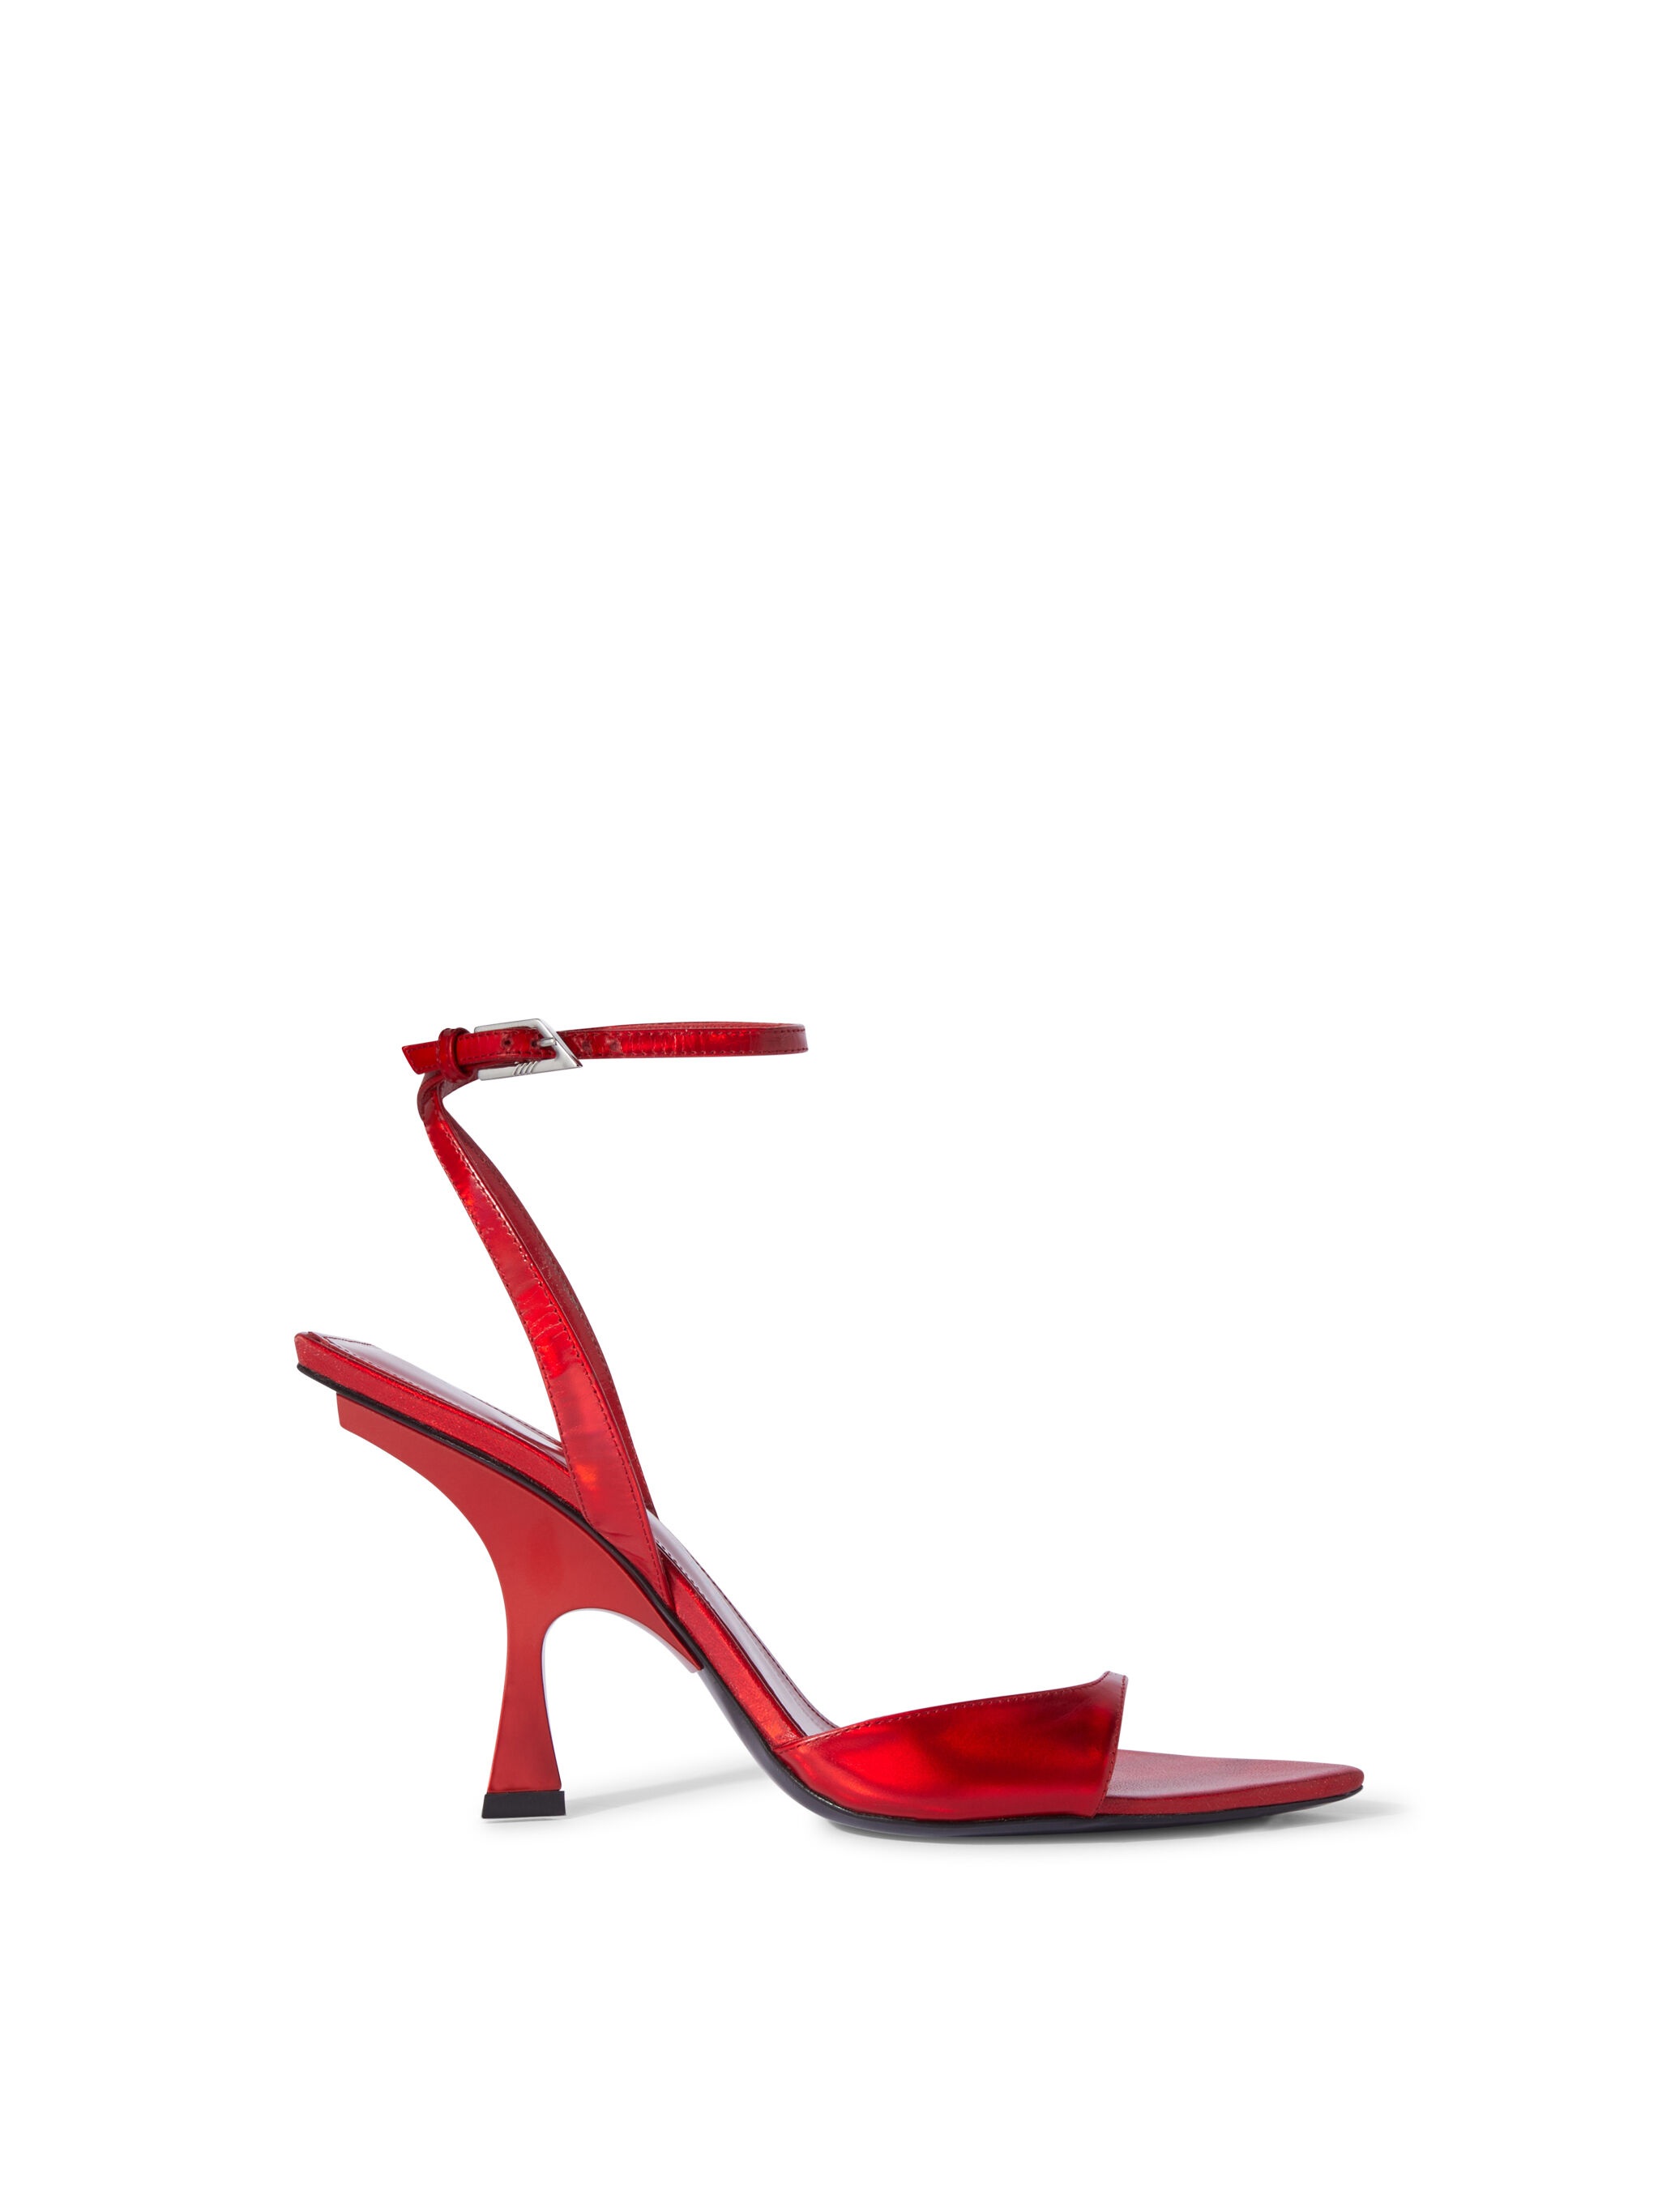 ''GG'' sandal mismatched vibrant red for Women | THE ATTICO®